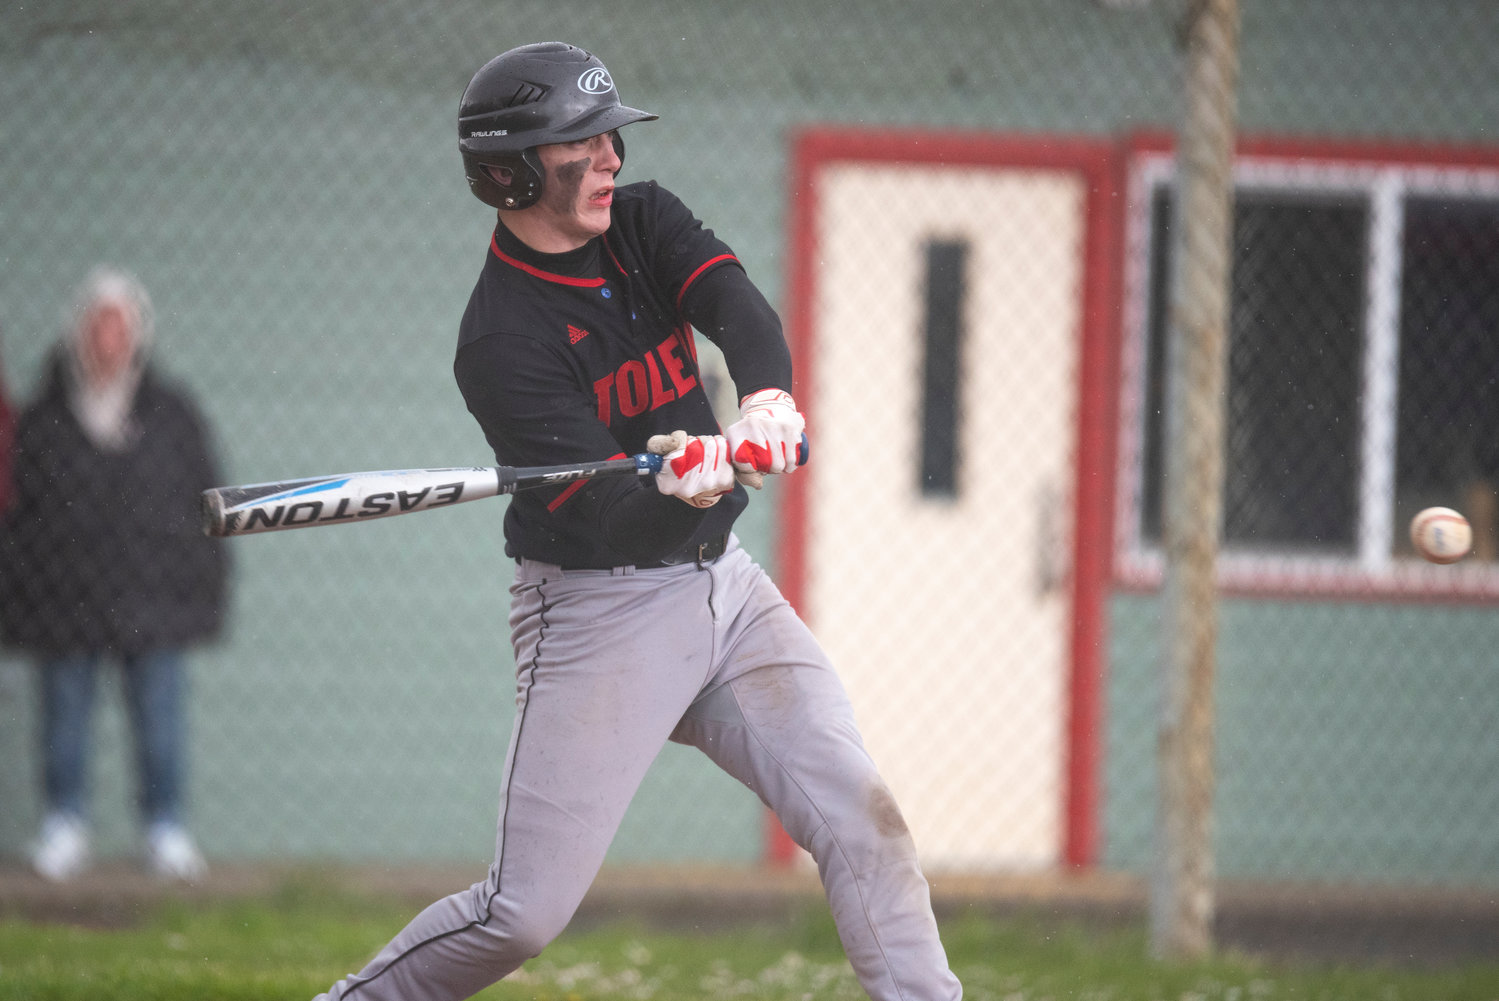 Toledo's Geoffrey Glass loads up to swing at a Winlock pitch during a road game on April 21.